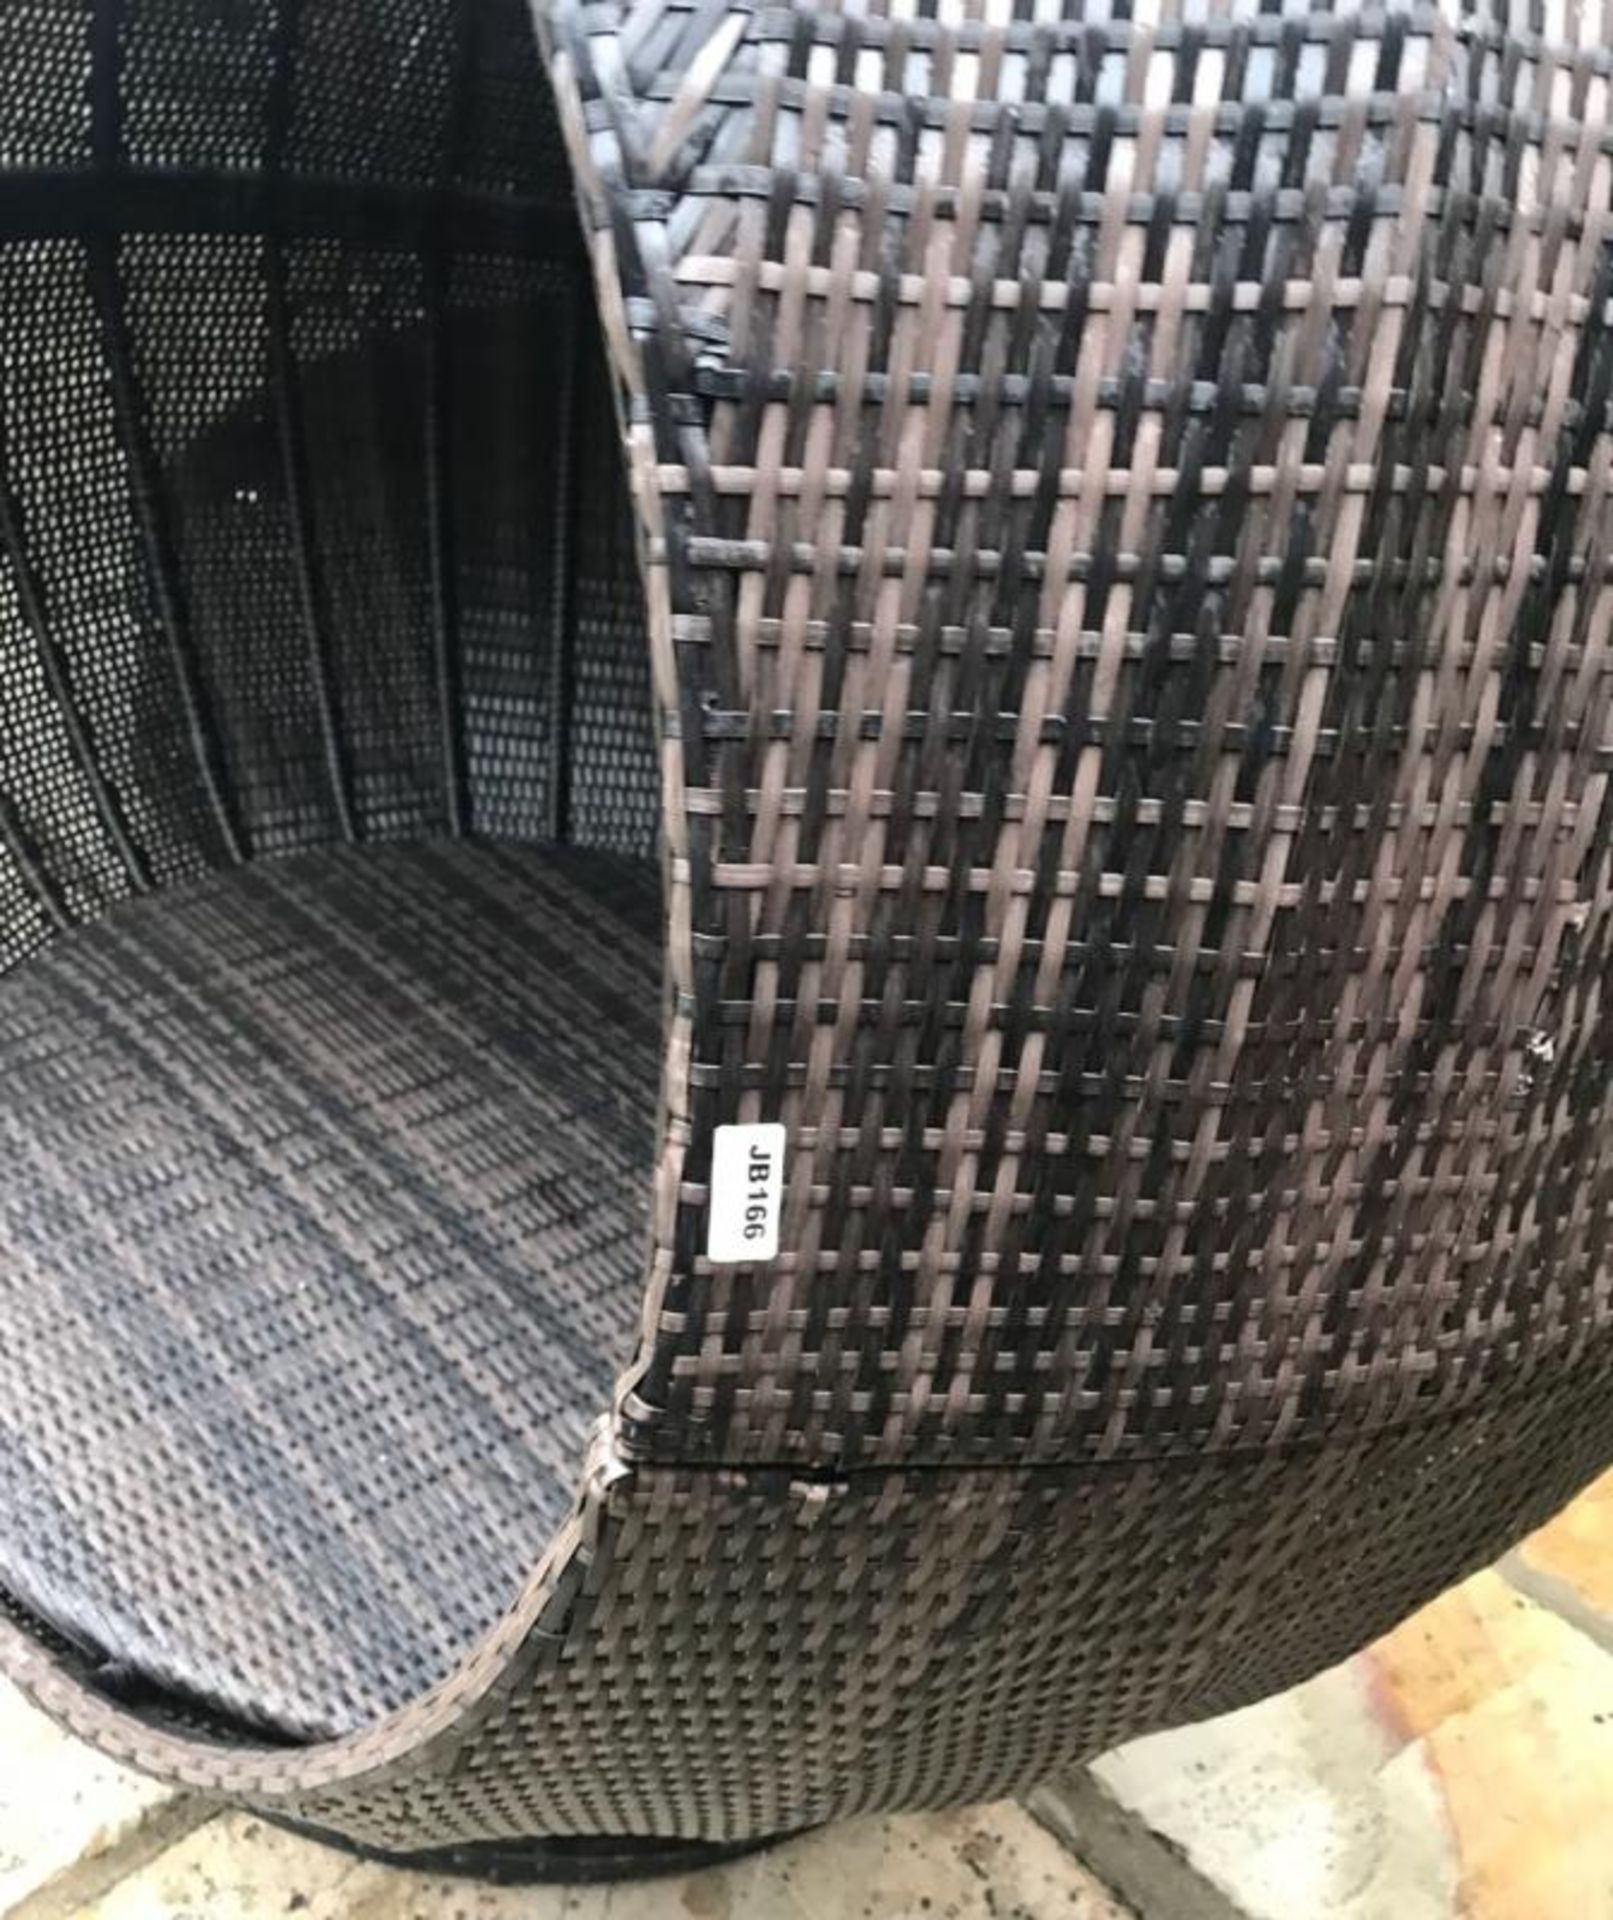 1 x Wicker/rattan Large Egg Shaped Daybed With Large Rounded Cushion Mat - Ref: JB166 - Pre- - Image 3 of 4